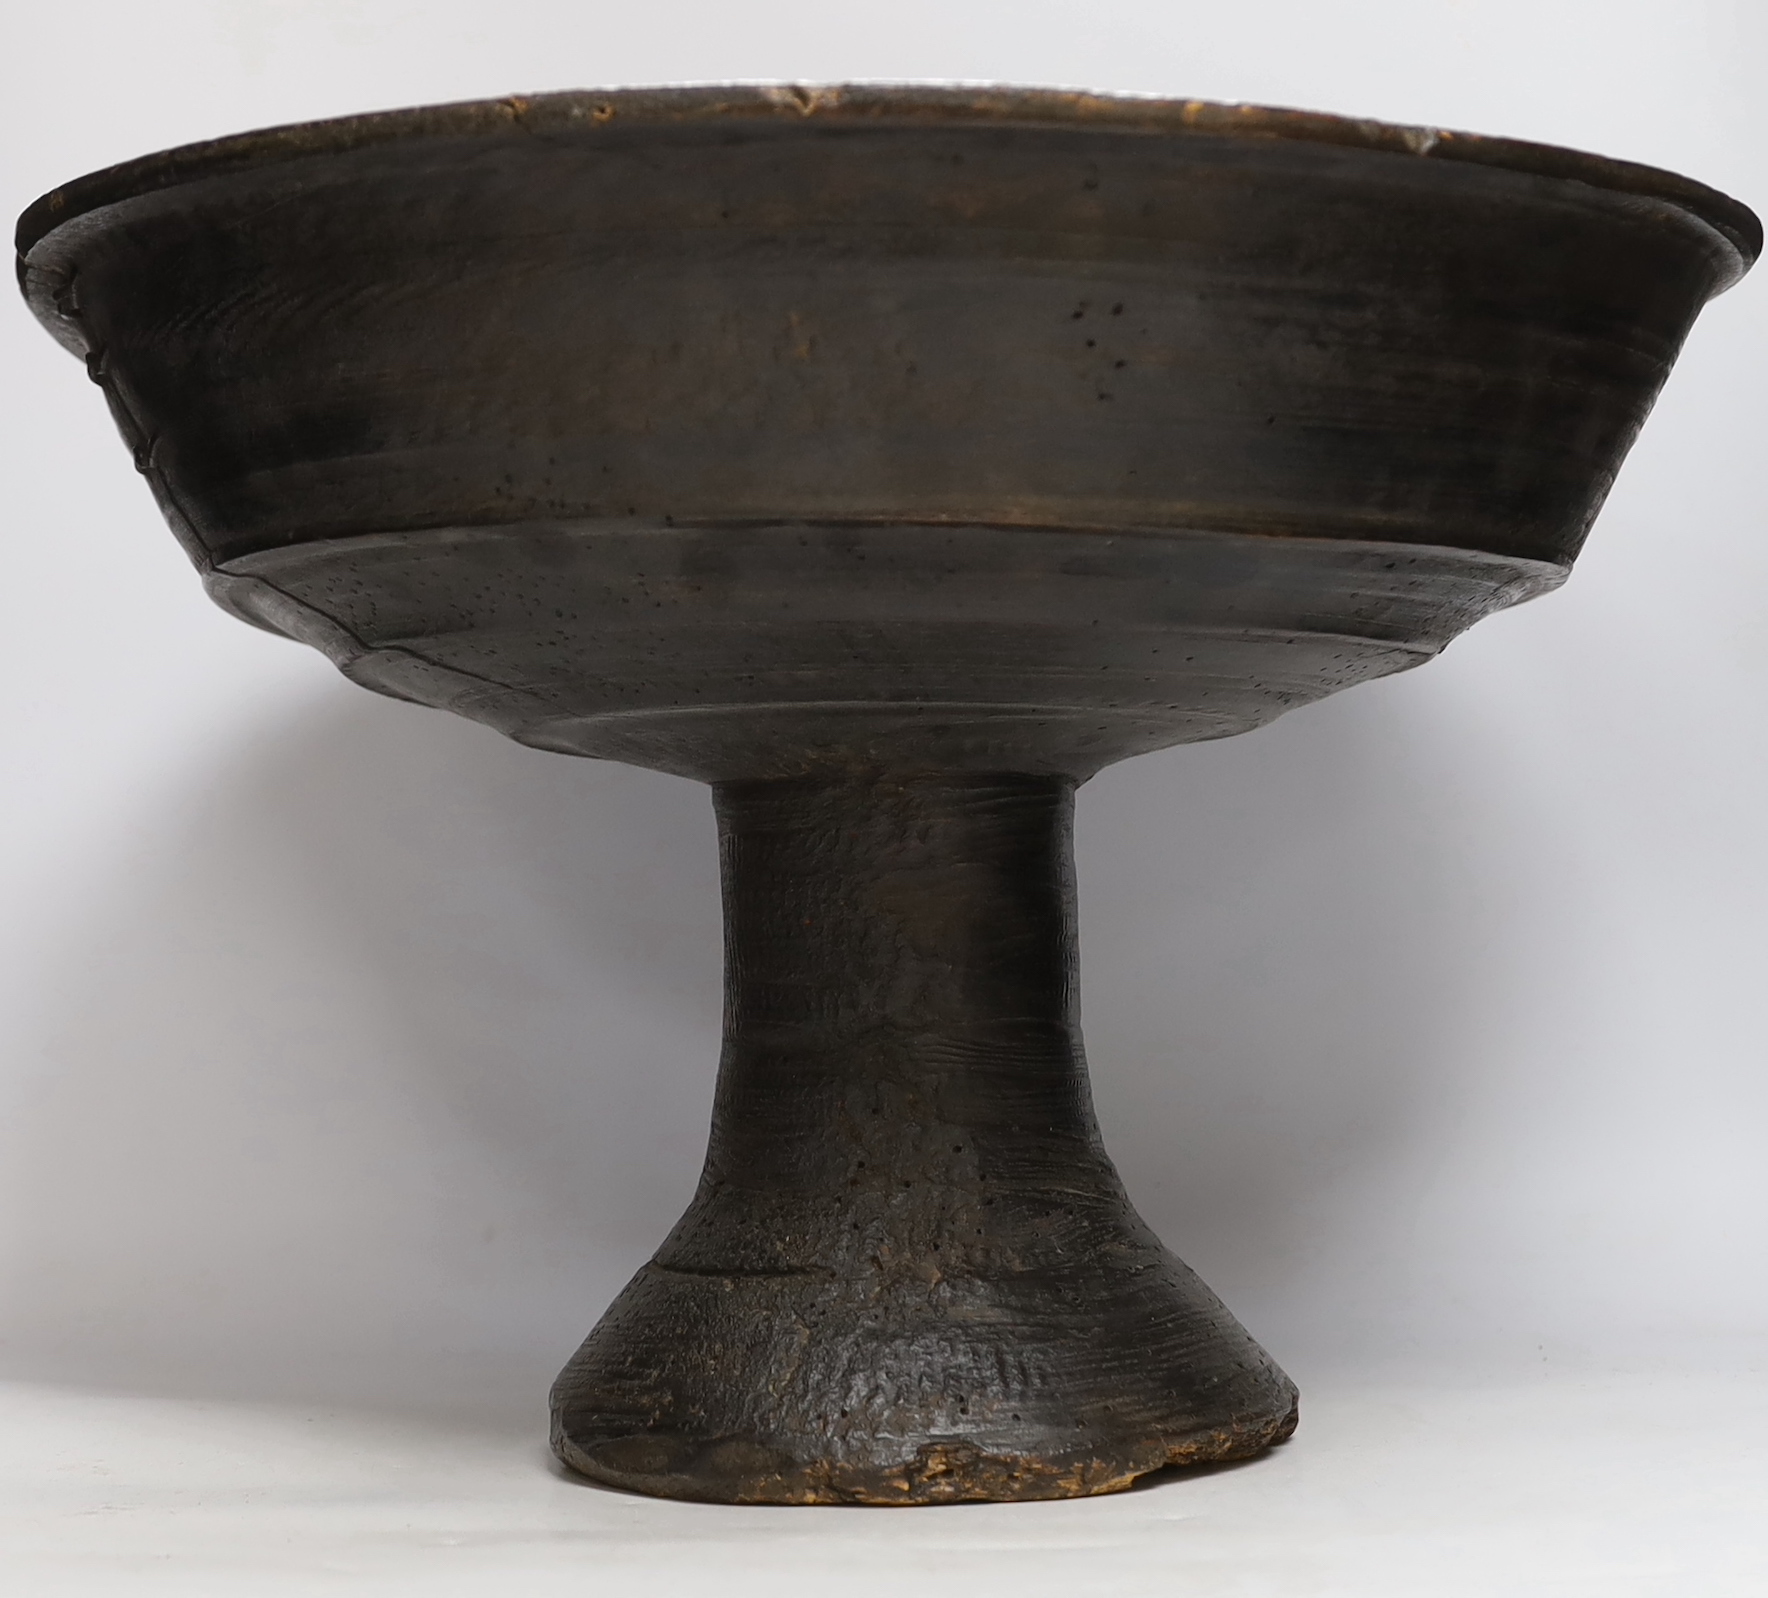 A 19th century turned wooden, possibly French, provincial pedestal bowl, 47cm diameter